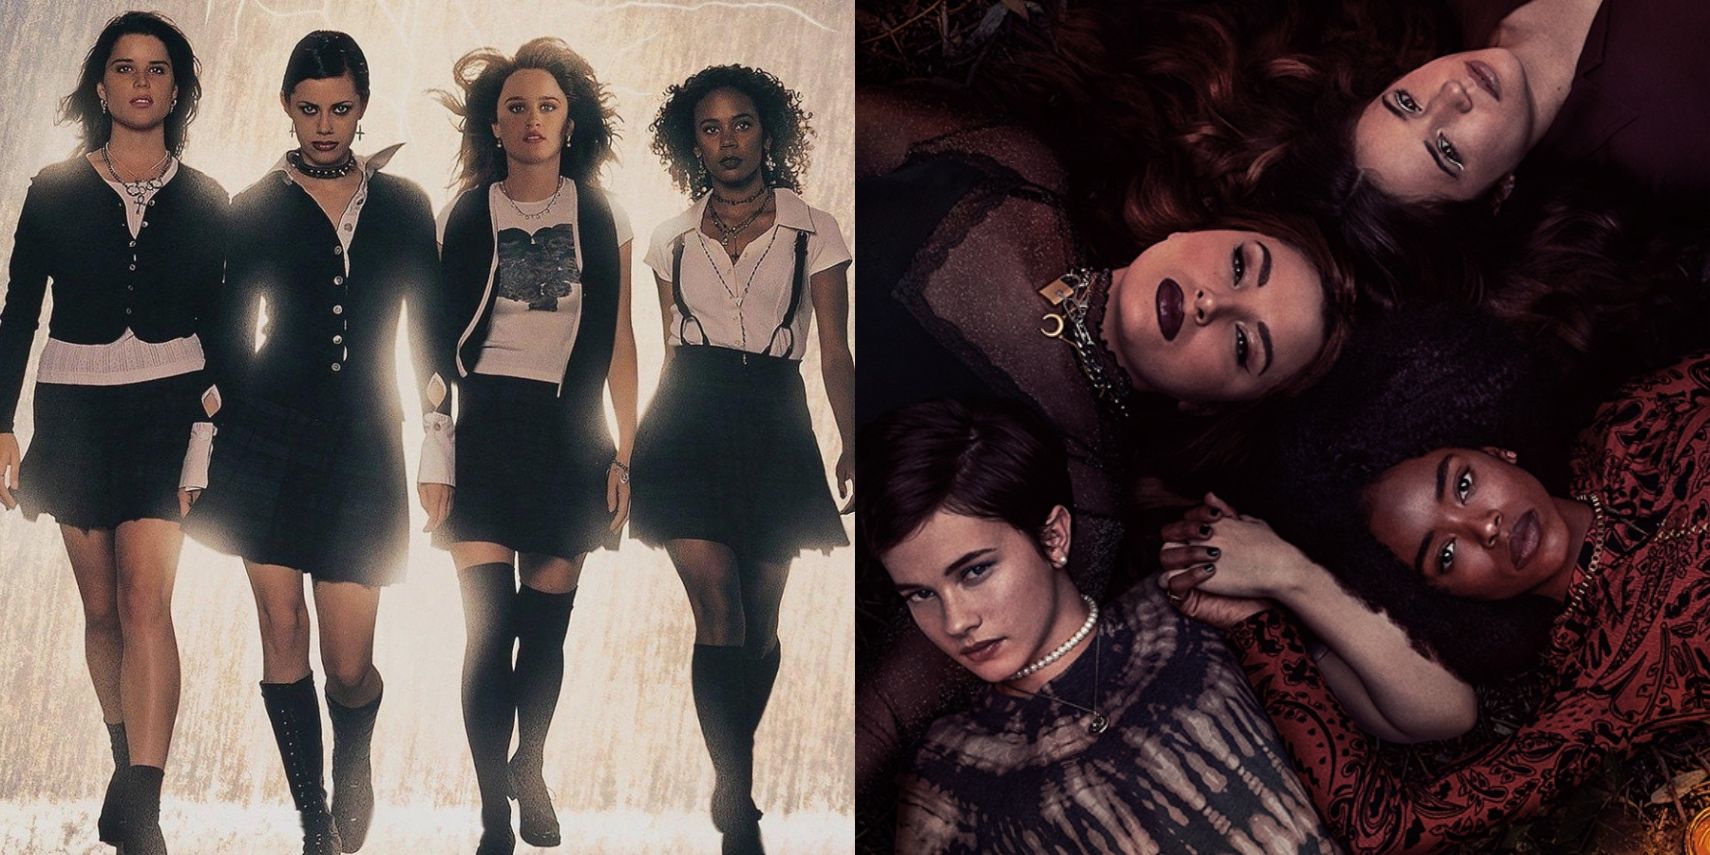 Movie poster from 1996 The Craft and poster from The Craft:Legacy